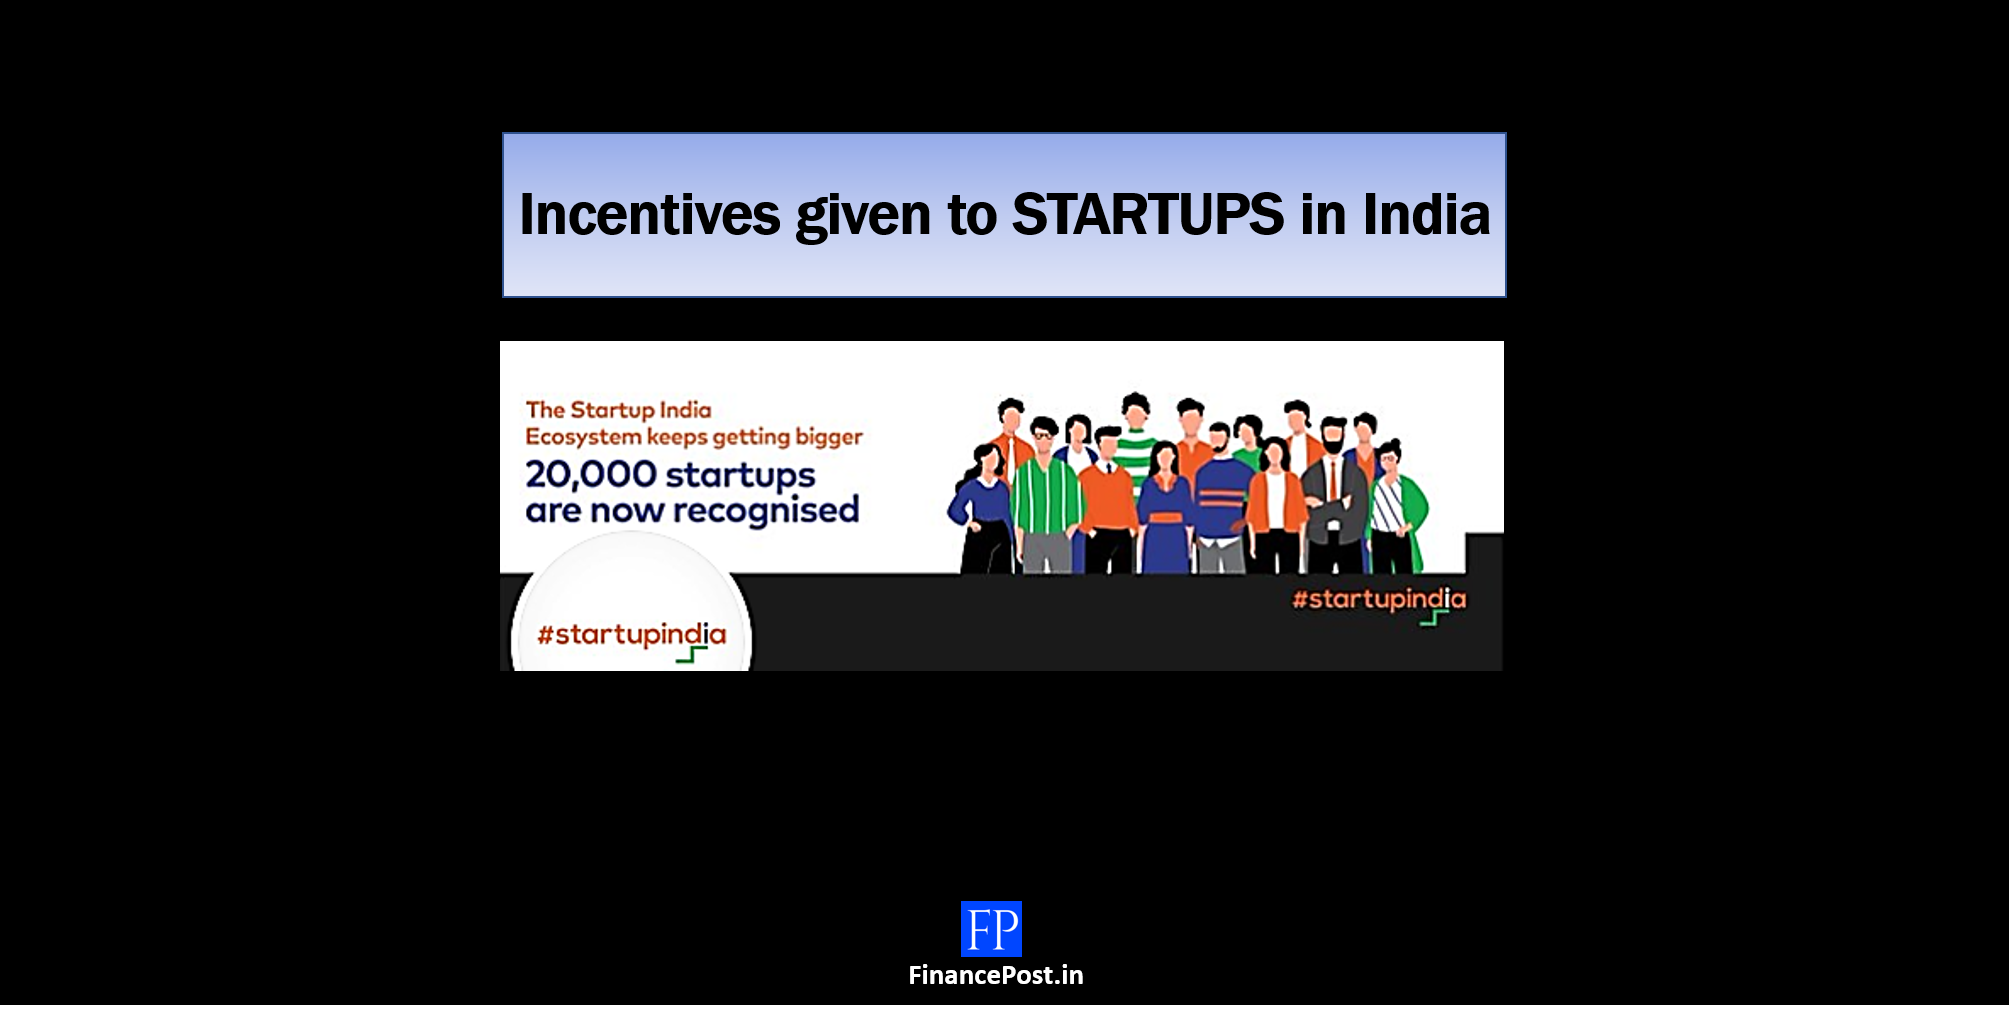 Incentives given to STARTUPS in India